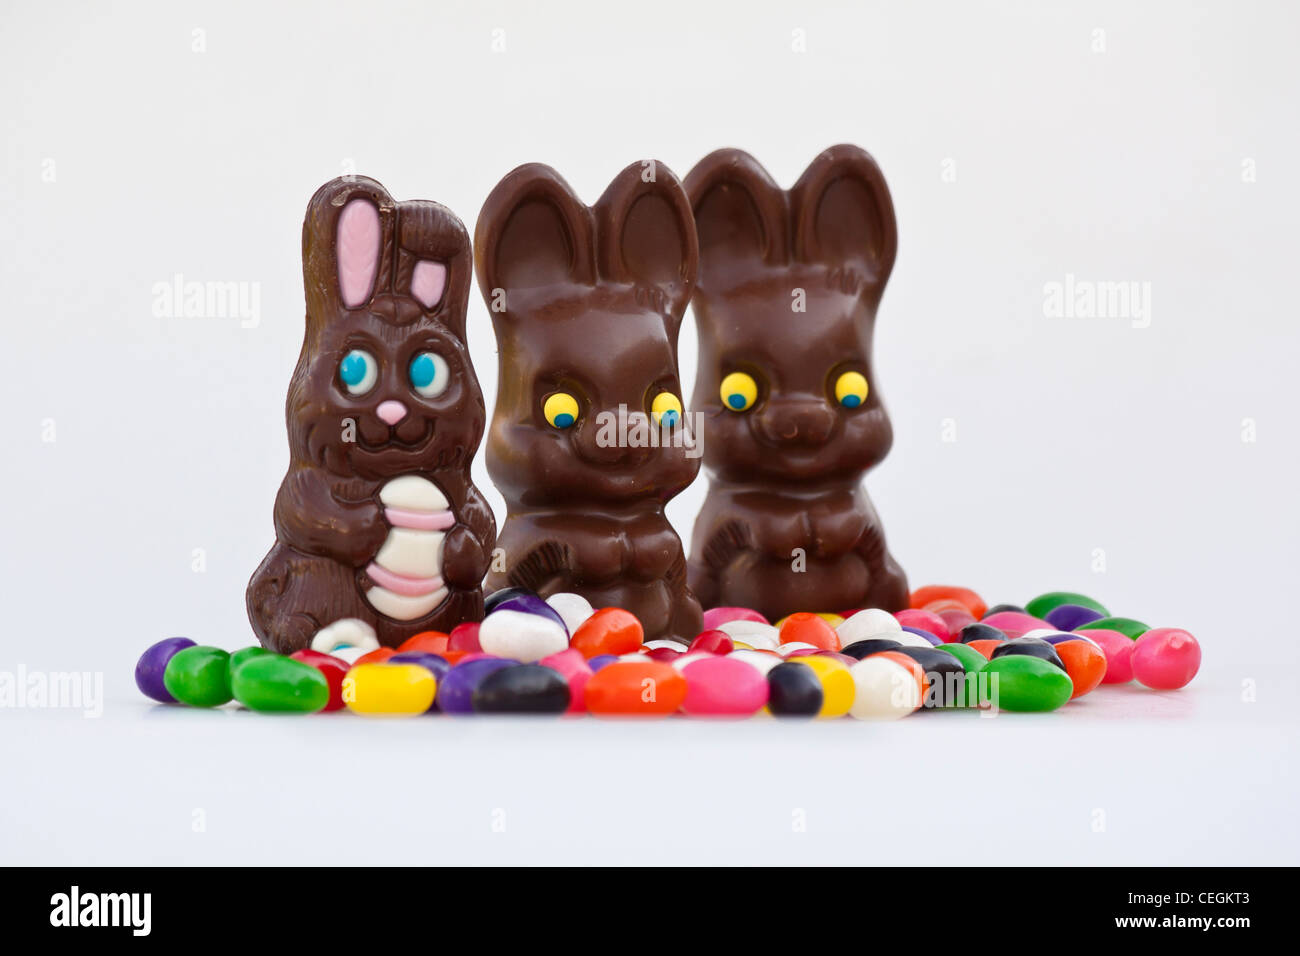 Easter Dark Chocolate Bunnies With Candies Jelly Beans Cut Out Isolated Close Up On White